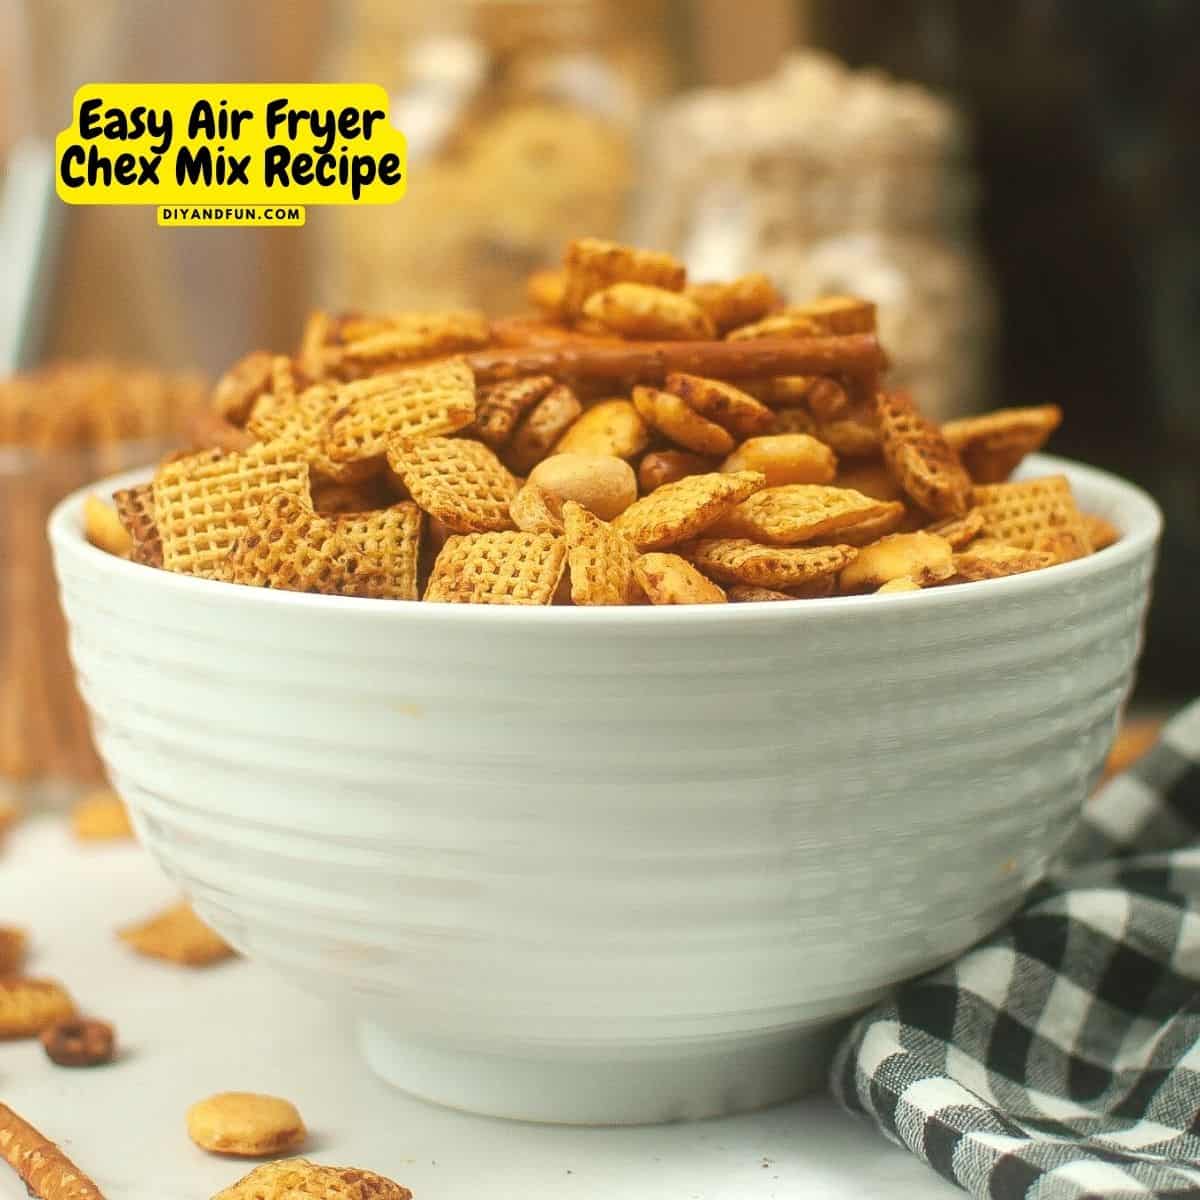 Easy Air Fryer Chex Mix Recipe, the perfect salty, crunch, and savory snack idea that can be made in about 10 minutes.